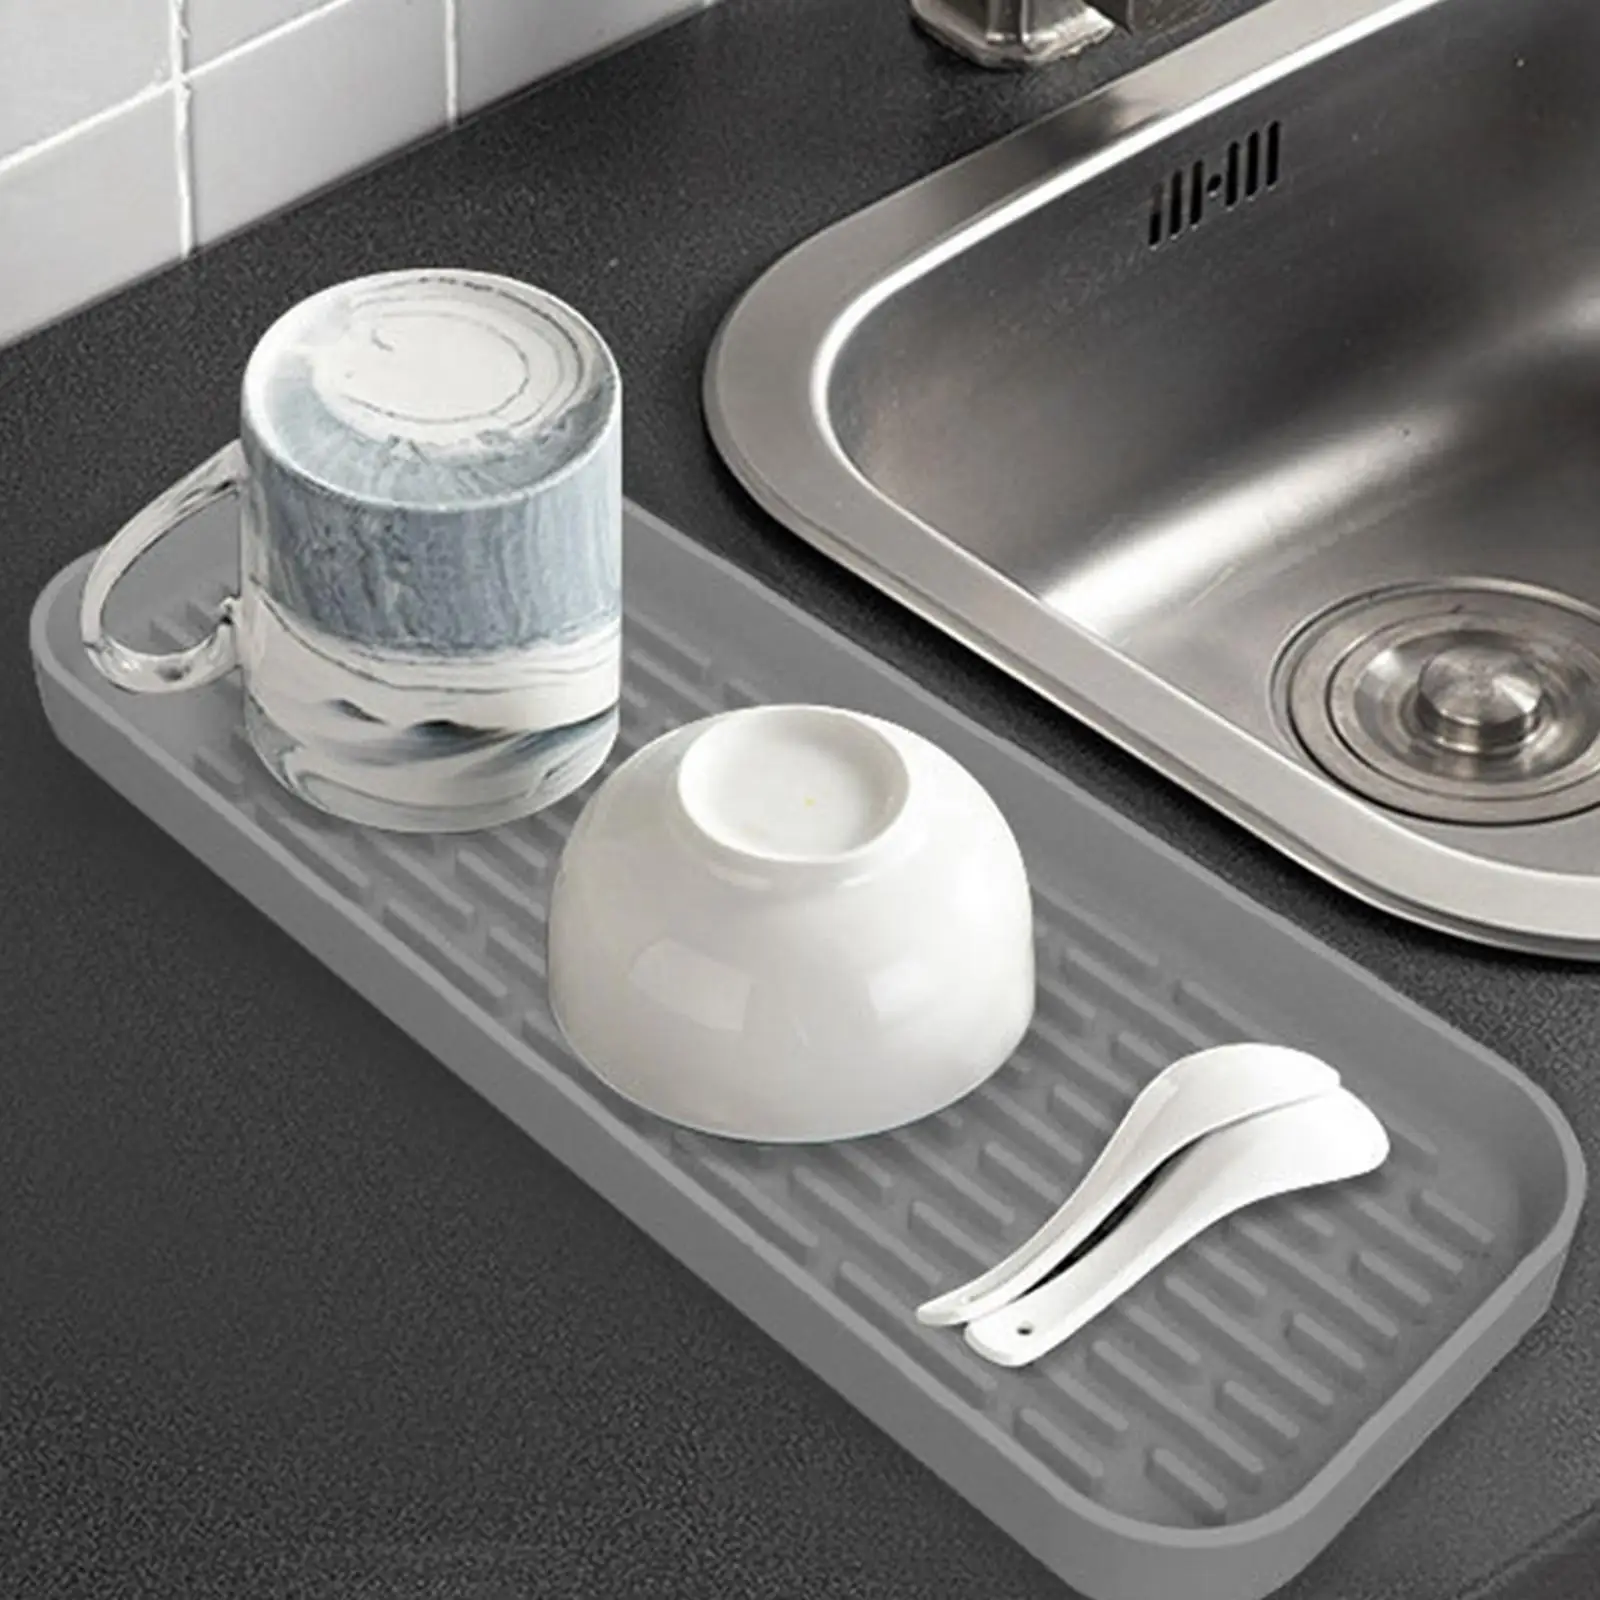 Silicone Tray Kitchen Storage Tray Waterproof Protector Mats Tableware Drip Tray Heat Resistant for Home Countertop Bathroom